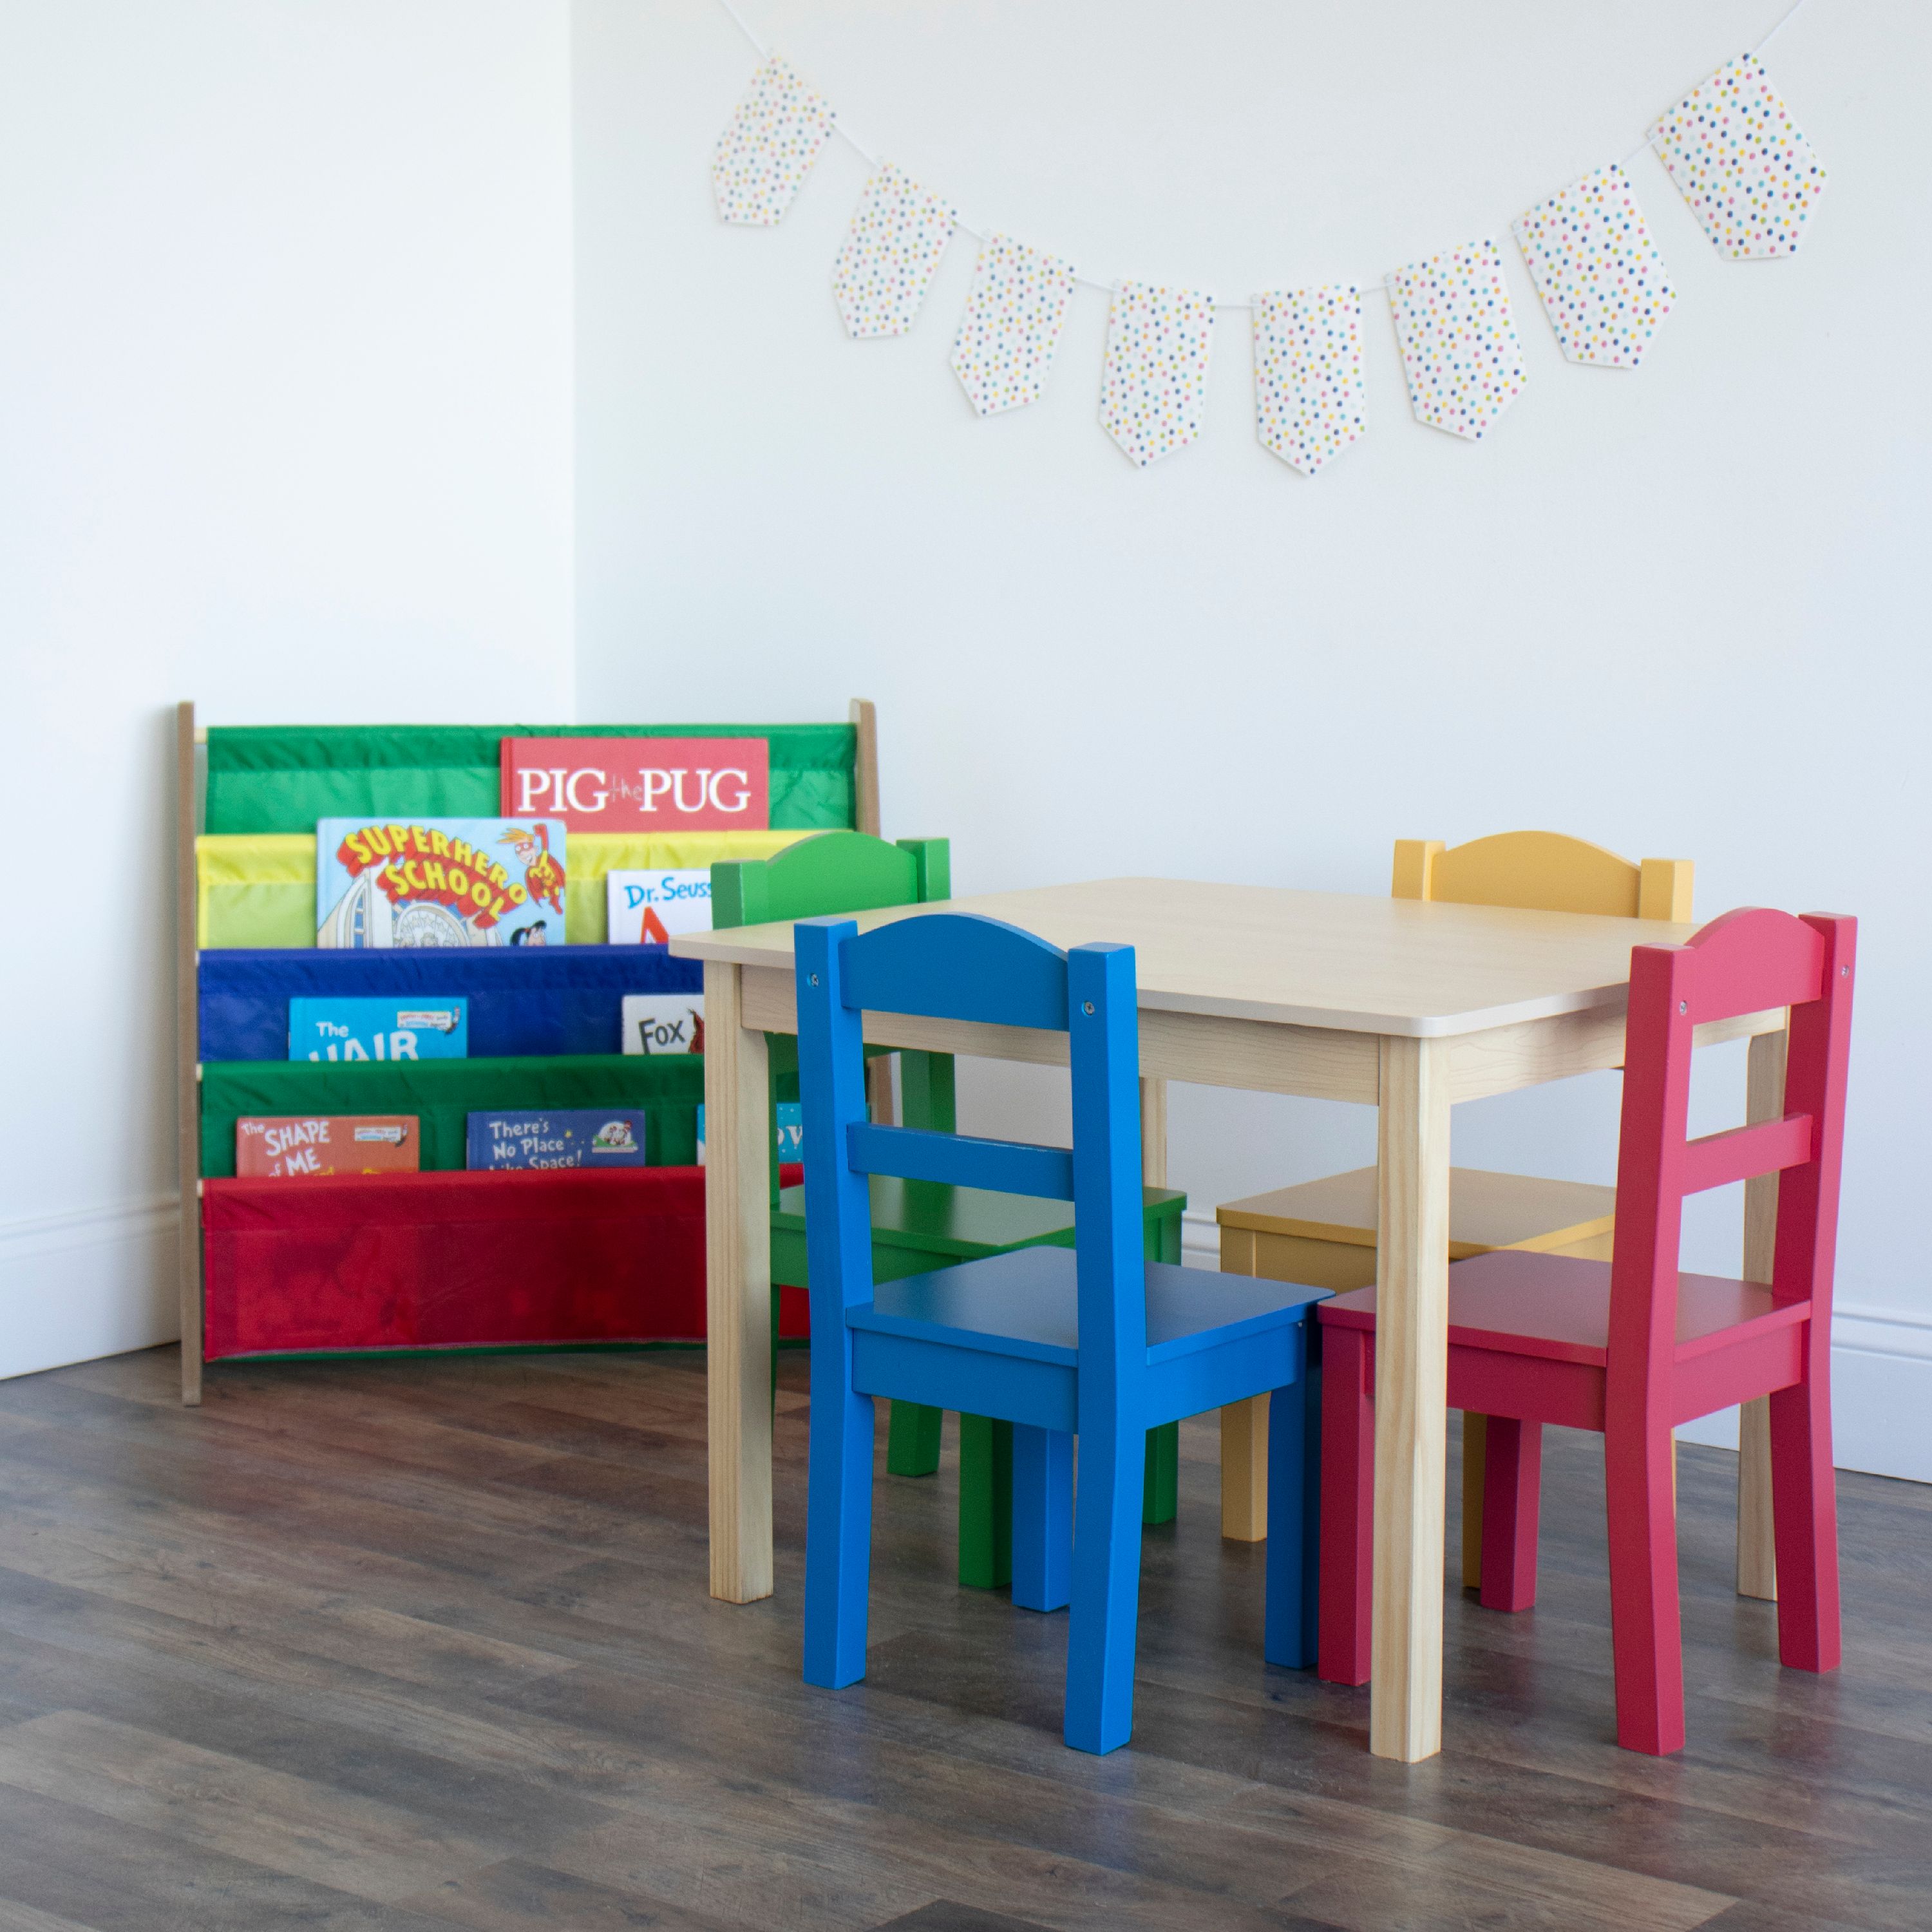 Humble Crew Primary Kids Wood Table and 4 Chairs Set, Natural Wood/Primary, for kids ages 3+ - image 4 of 5